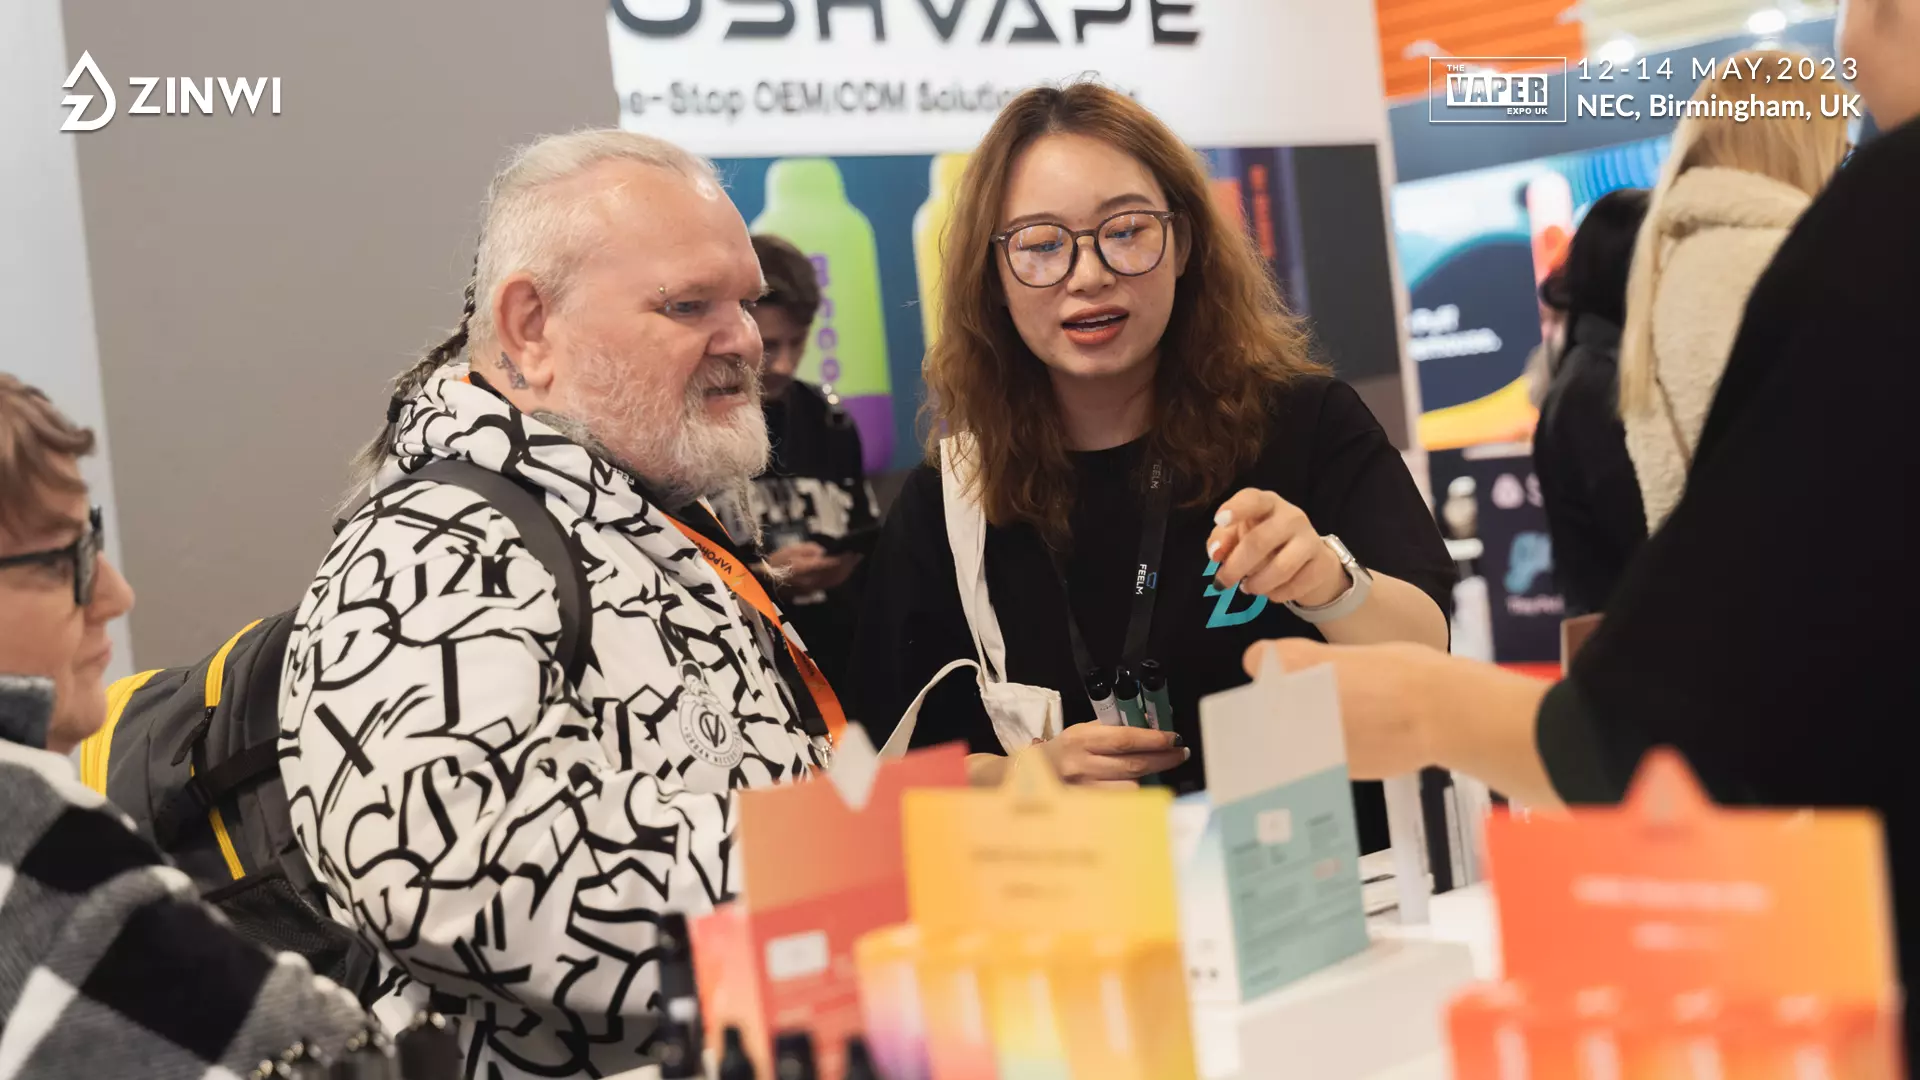 The Vaper Expo UK has come to an end, Zinwi will meet you in Dubai